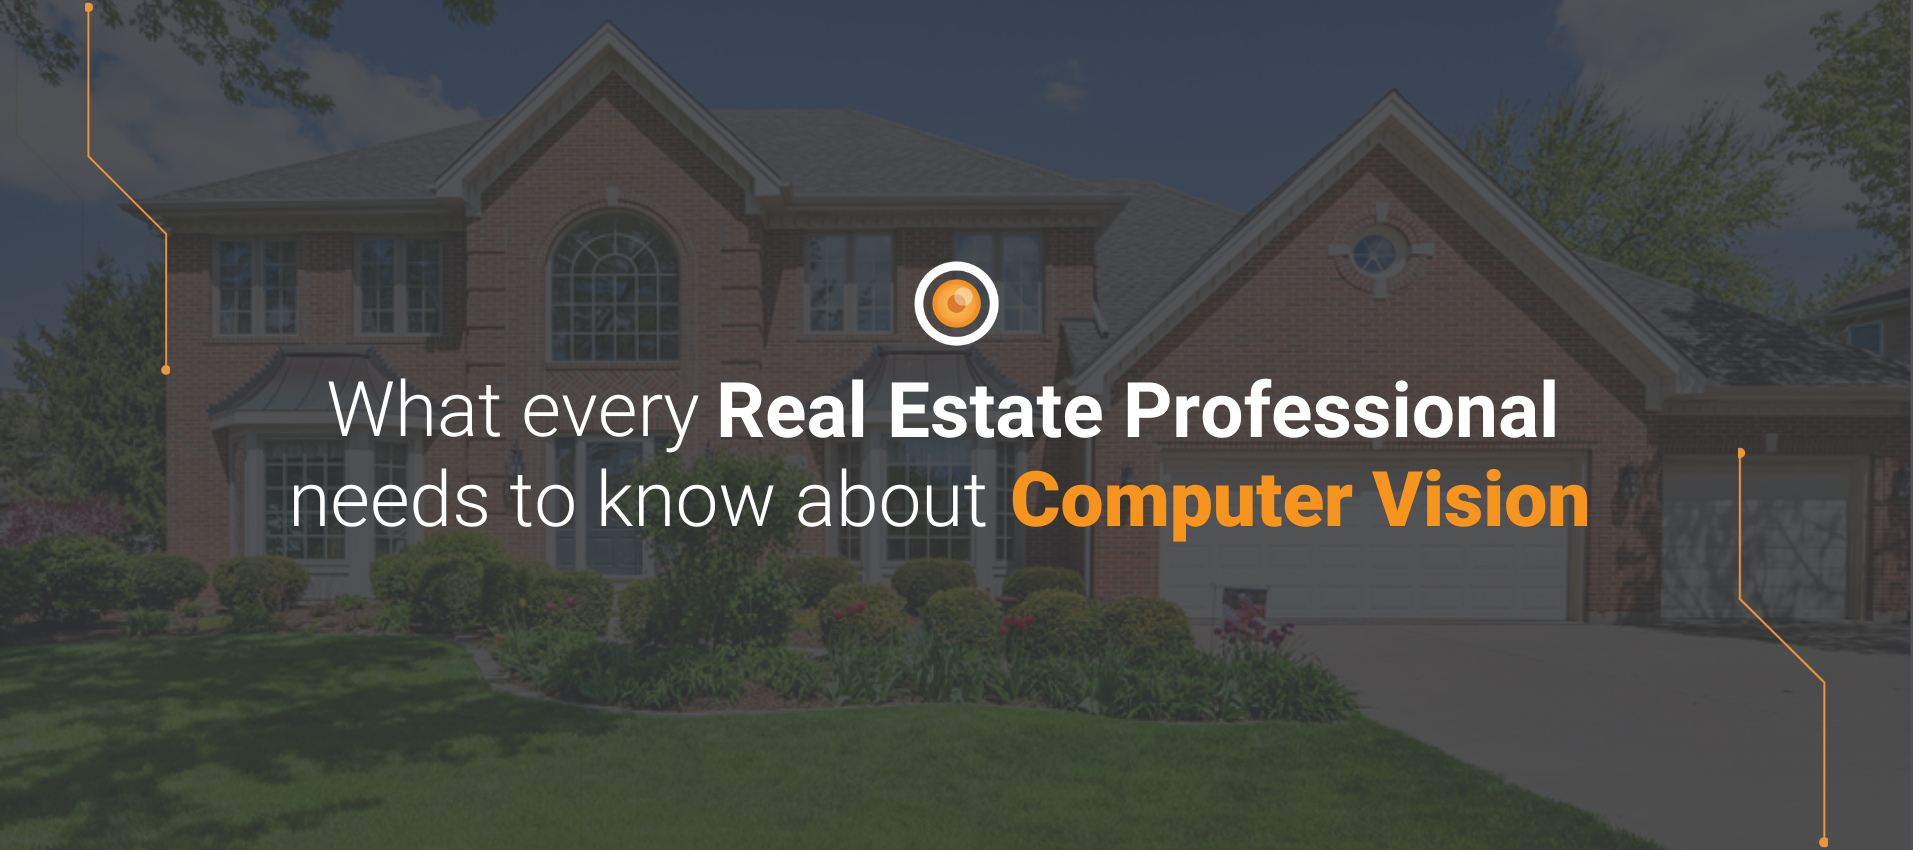 AI Primer: What Every Real Estate Professional Needs to Know About Computer Vision